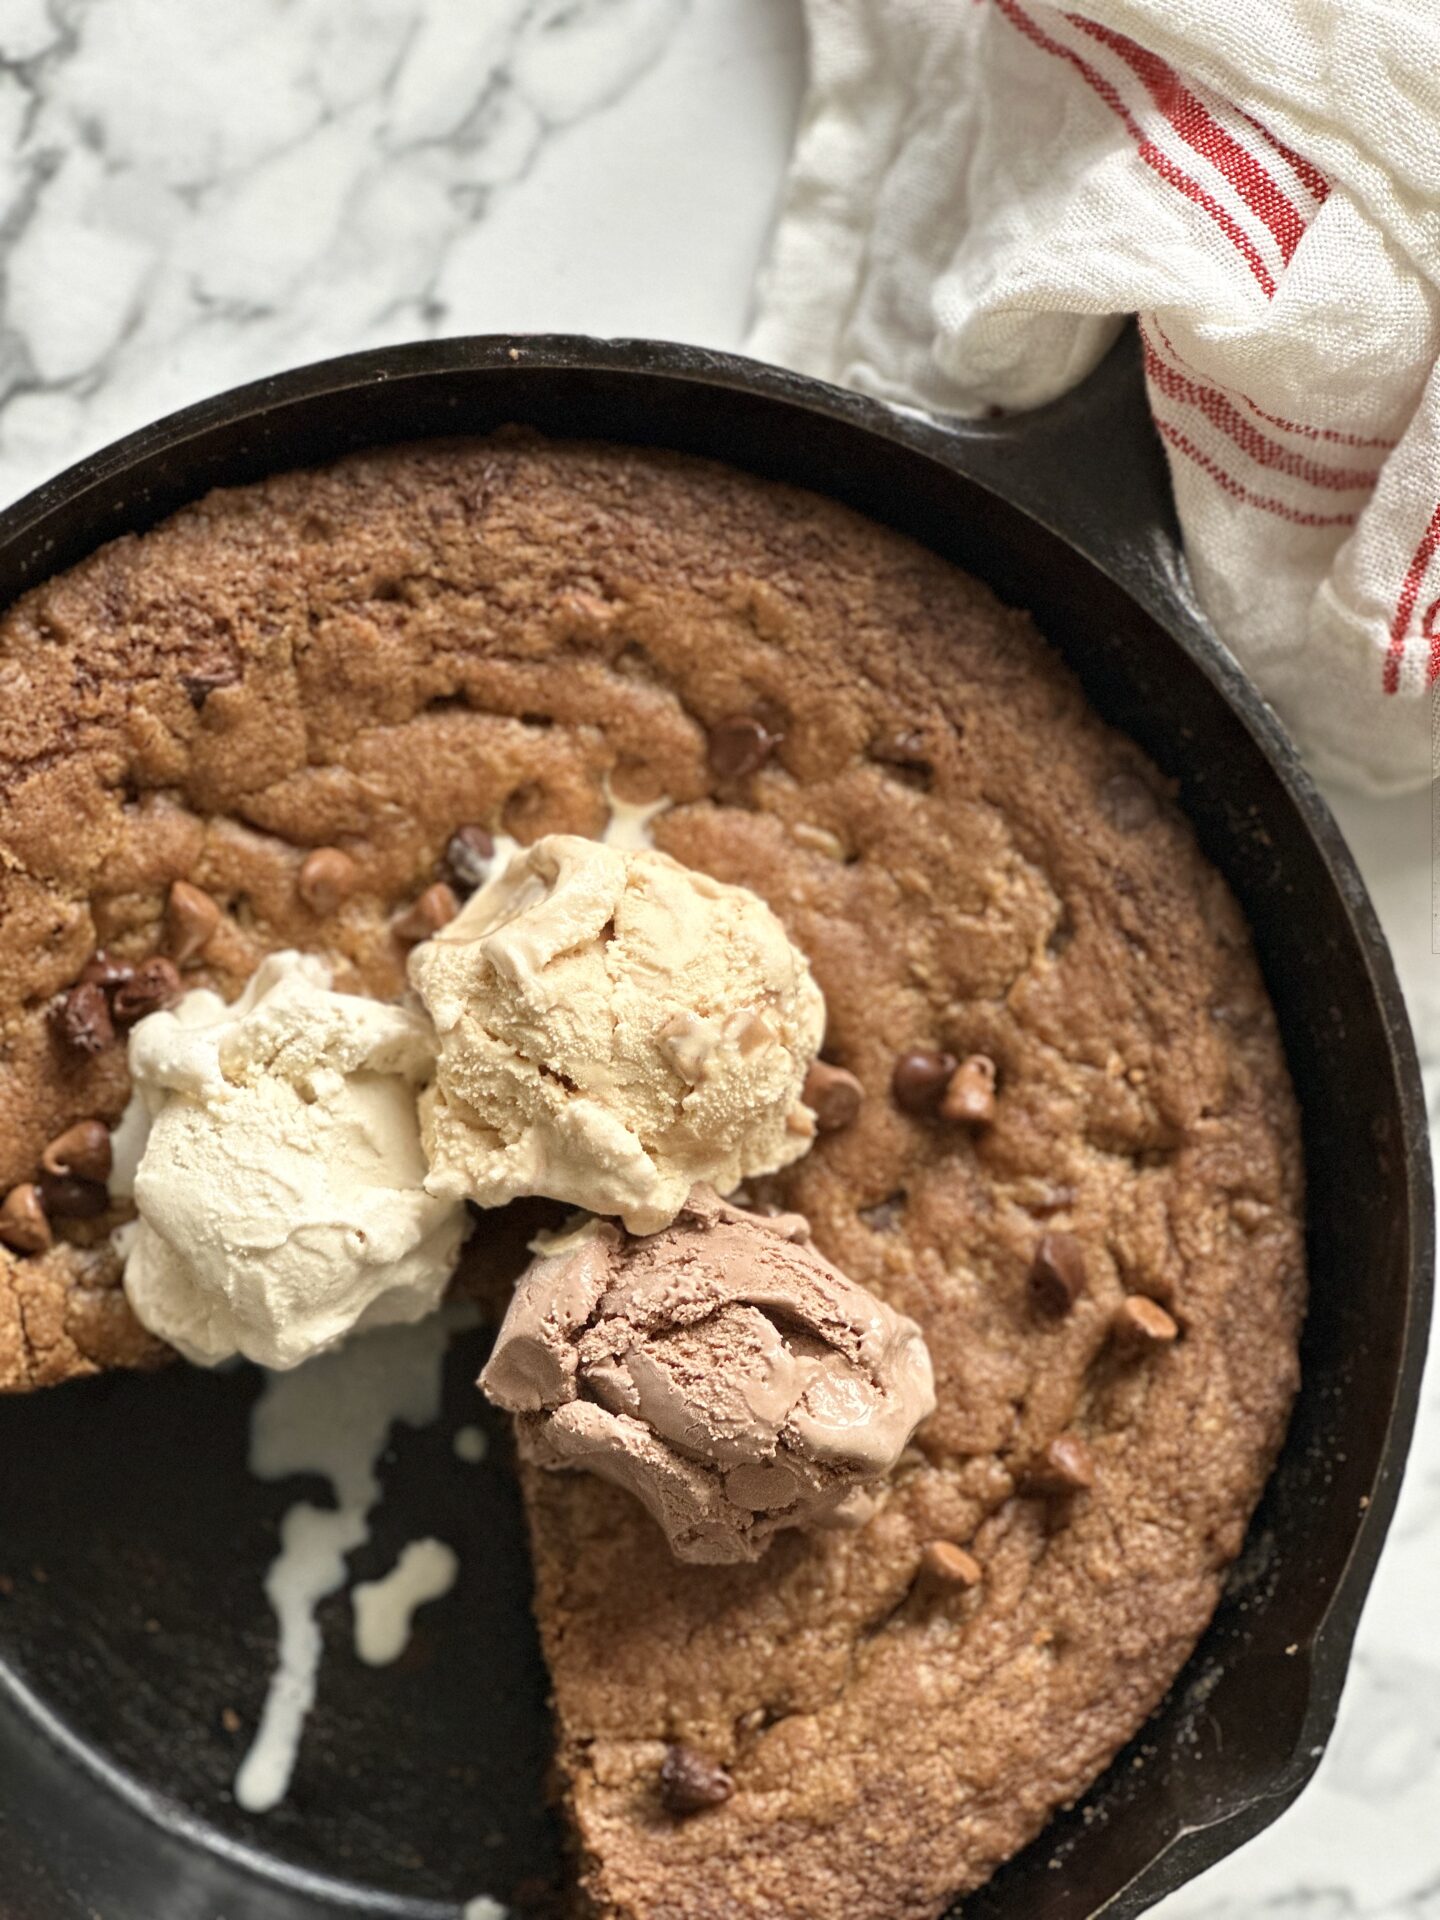 Giant deep dish chocolate chip cookie baked in a cast iron skillet and topped with scoops of ice cream.